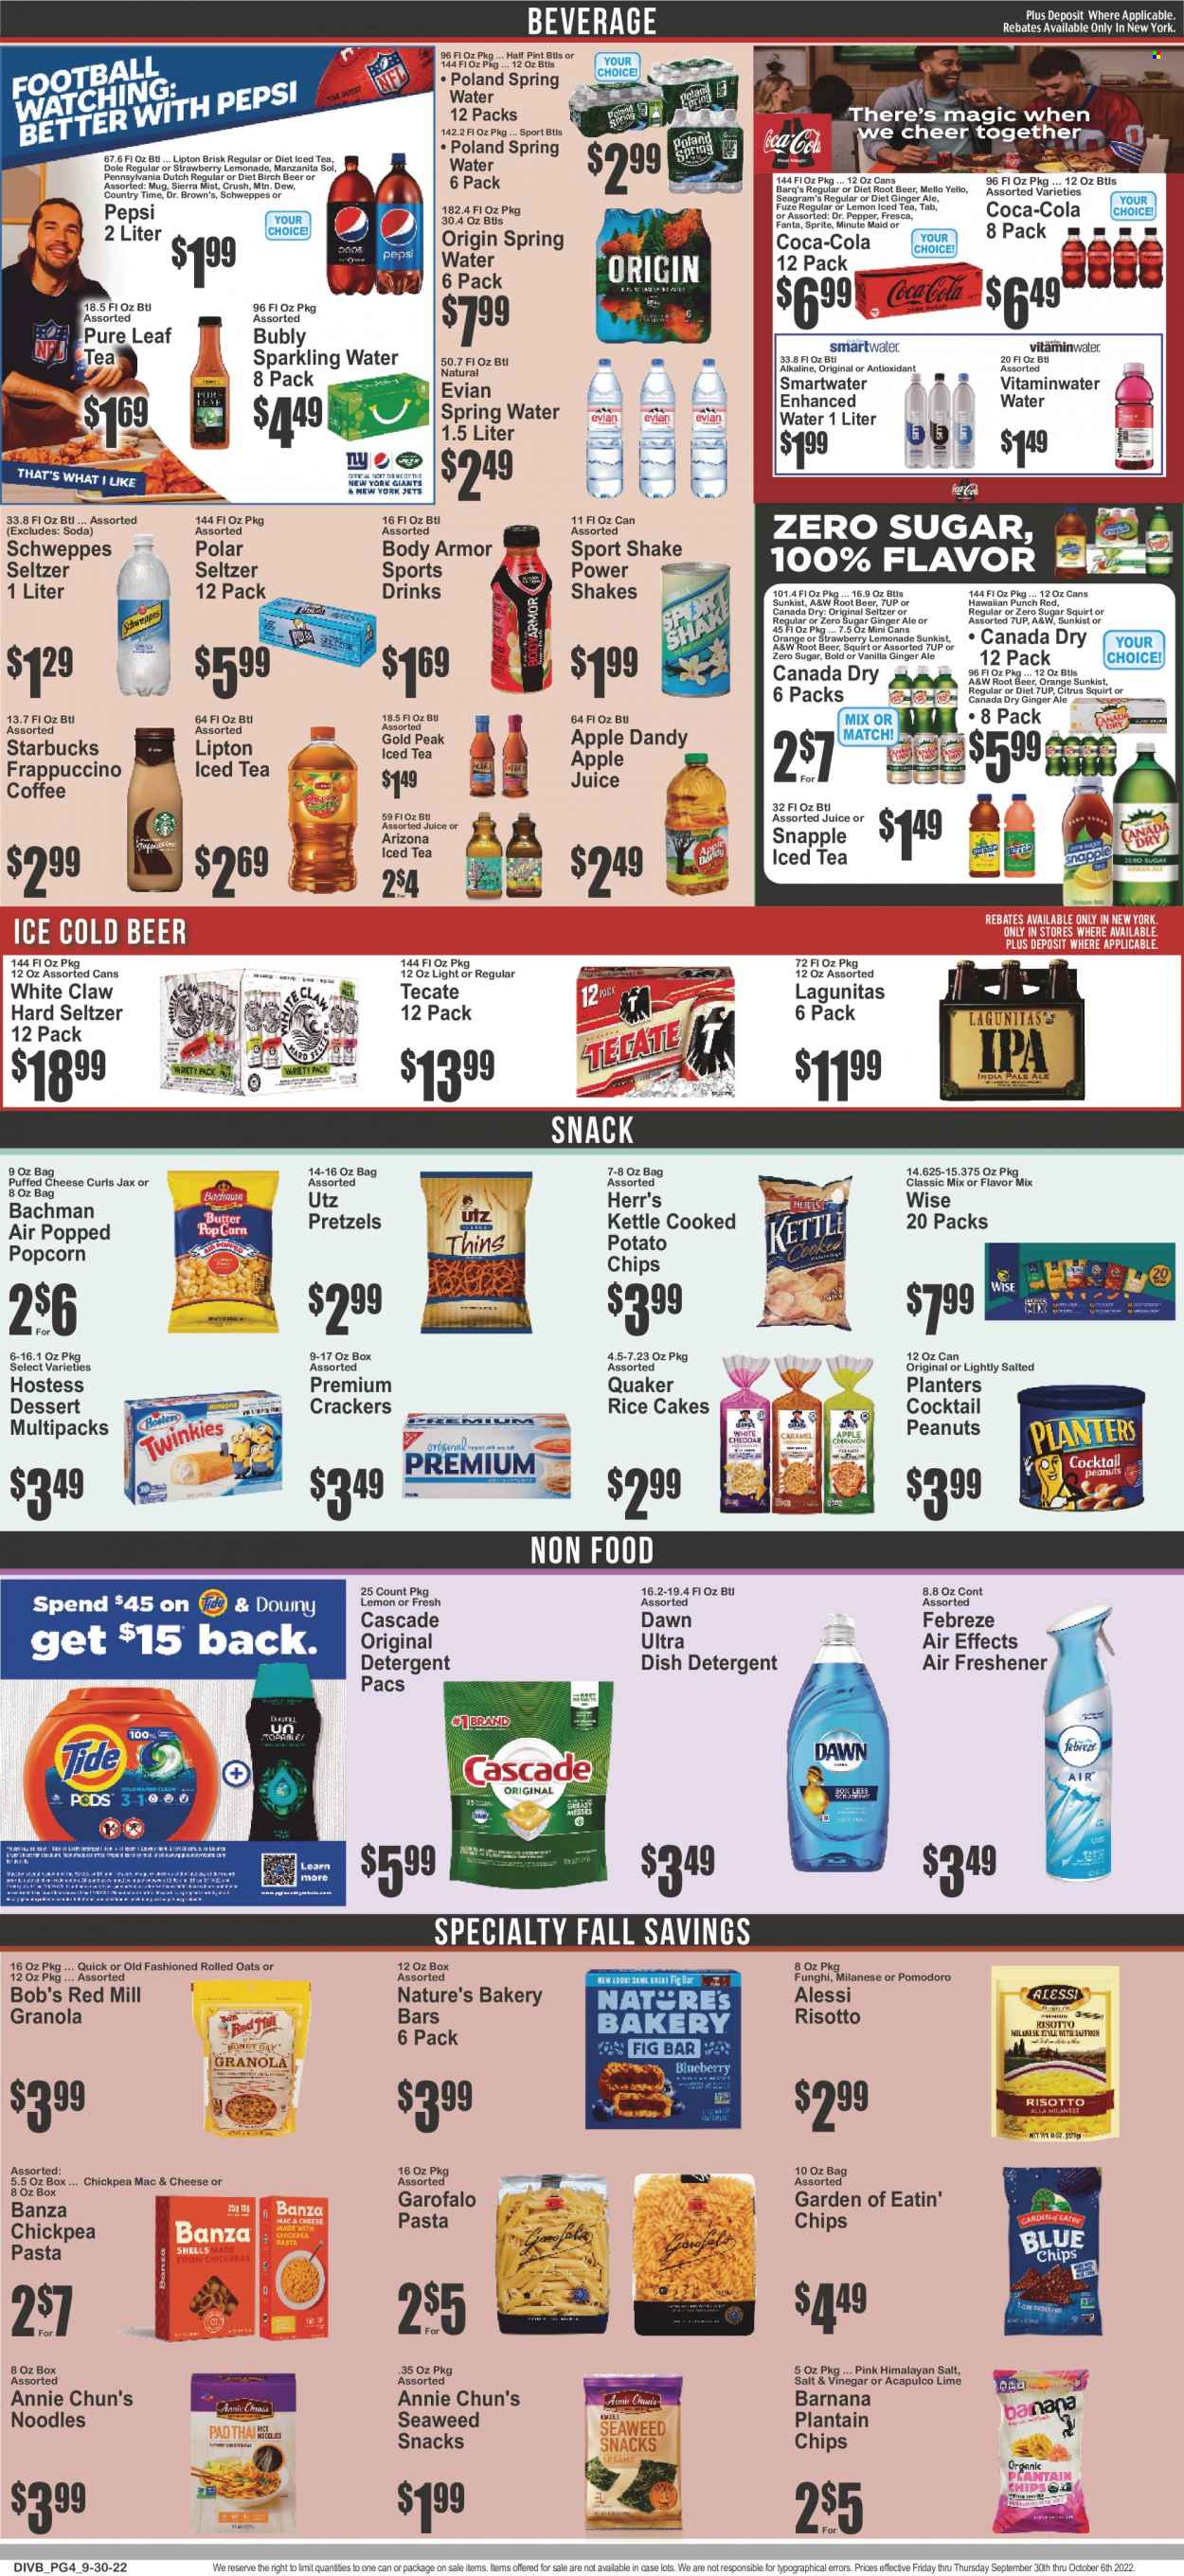 thumbnail - Super Fresh Flyer - 09/30/2022 - 10/06/2022 - Sales products - pretzels, Dole, oranges, risotto, pasta, Quaker, noodles, shake, snack, crackers, potato chips, chips, popcorn, oats, granola, rolled oats, rice, peanuts, Planters, apple juice, Canada Dry, Coca-Cola, ginger ale, lemonade, Mountain Dew, Schweppes, Sprite, Pepsi, juice, Fanta, Body Armor, Lipton, ice tea, Dr. Pepper, 7UP, AriZona, Snapple, Dr. Brown's, A&W, Sierra Mist, Country Time, fruit punch, spring water, soda, sparkling water, Smartwater, Evian, Pure Leaf, coffee, Starbucks, frappuccino, White Claw, Hard Seltzer, beer, Sol, detergent, Febreze, Cascade, dishwasher cleaner. Page 4.